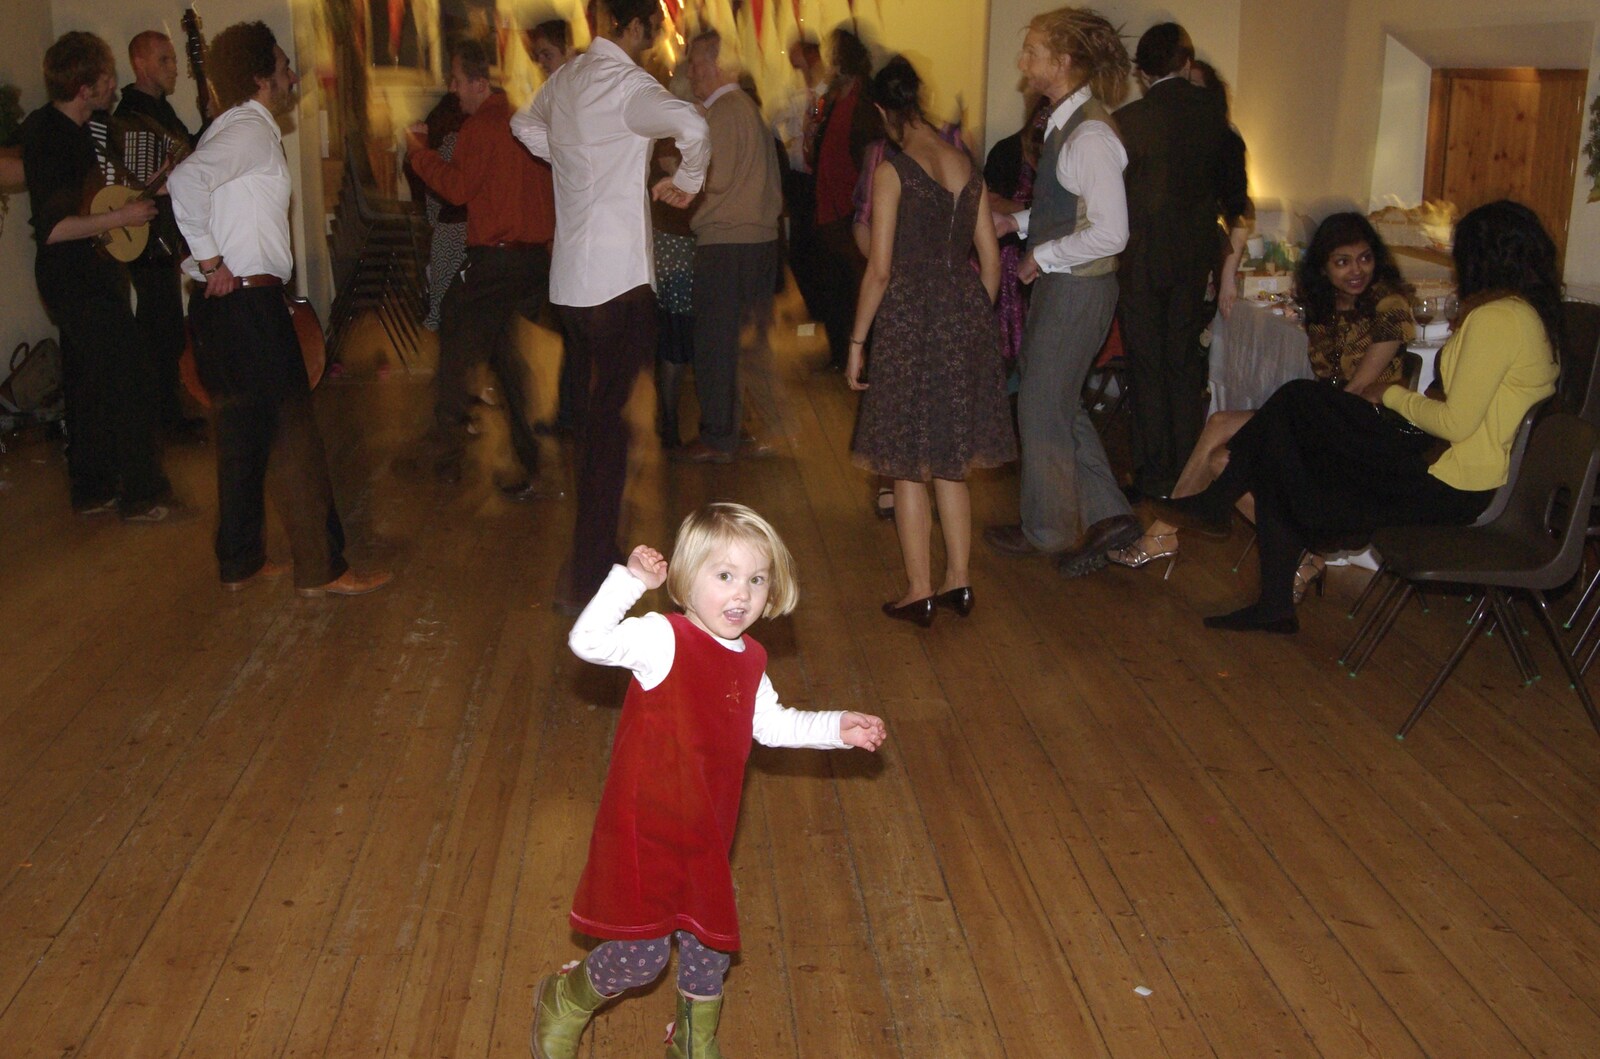 A small girl busts some moves from An Oxford Wedding, Iffley, Oxfordshire - 20th December 2008